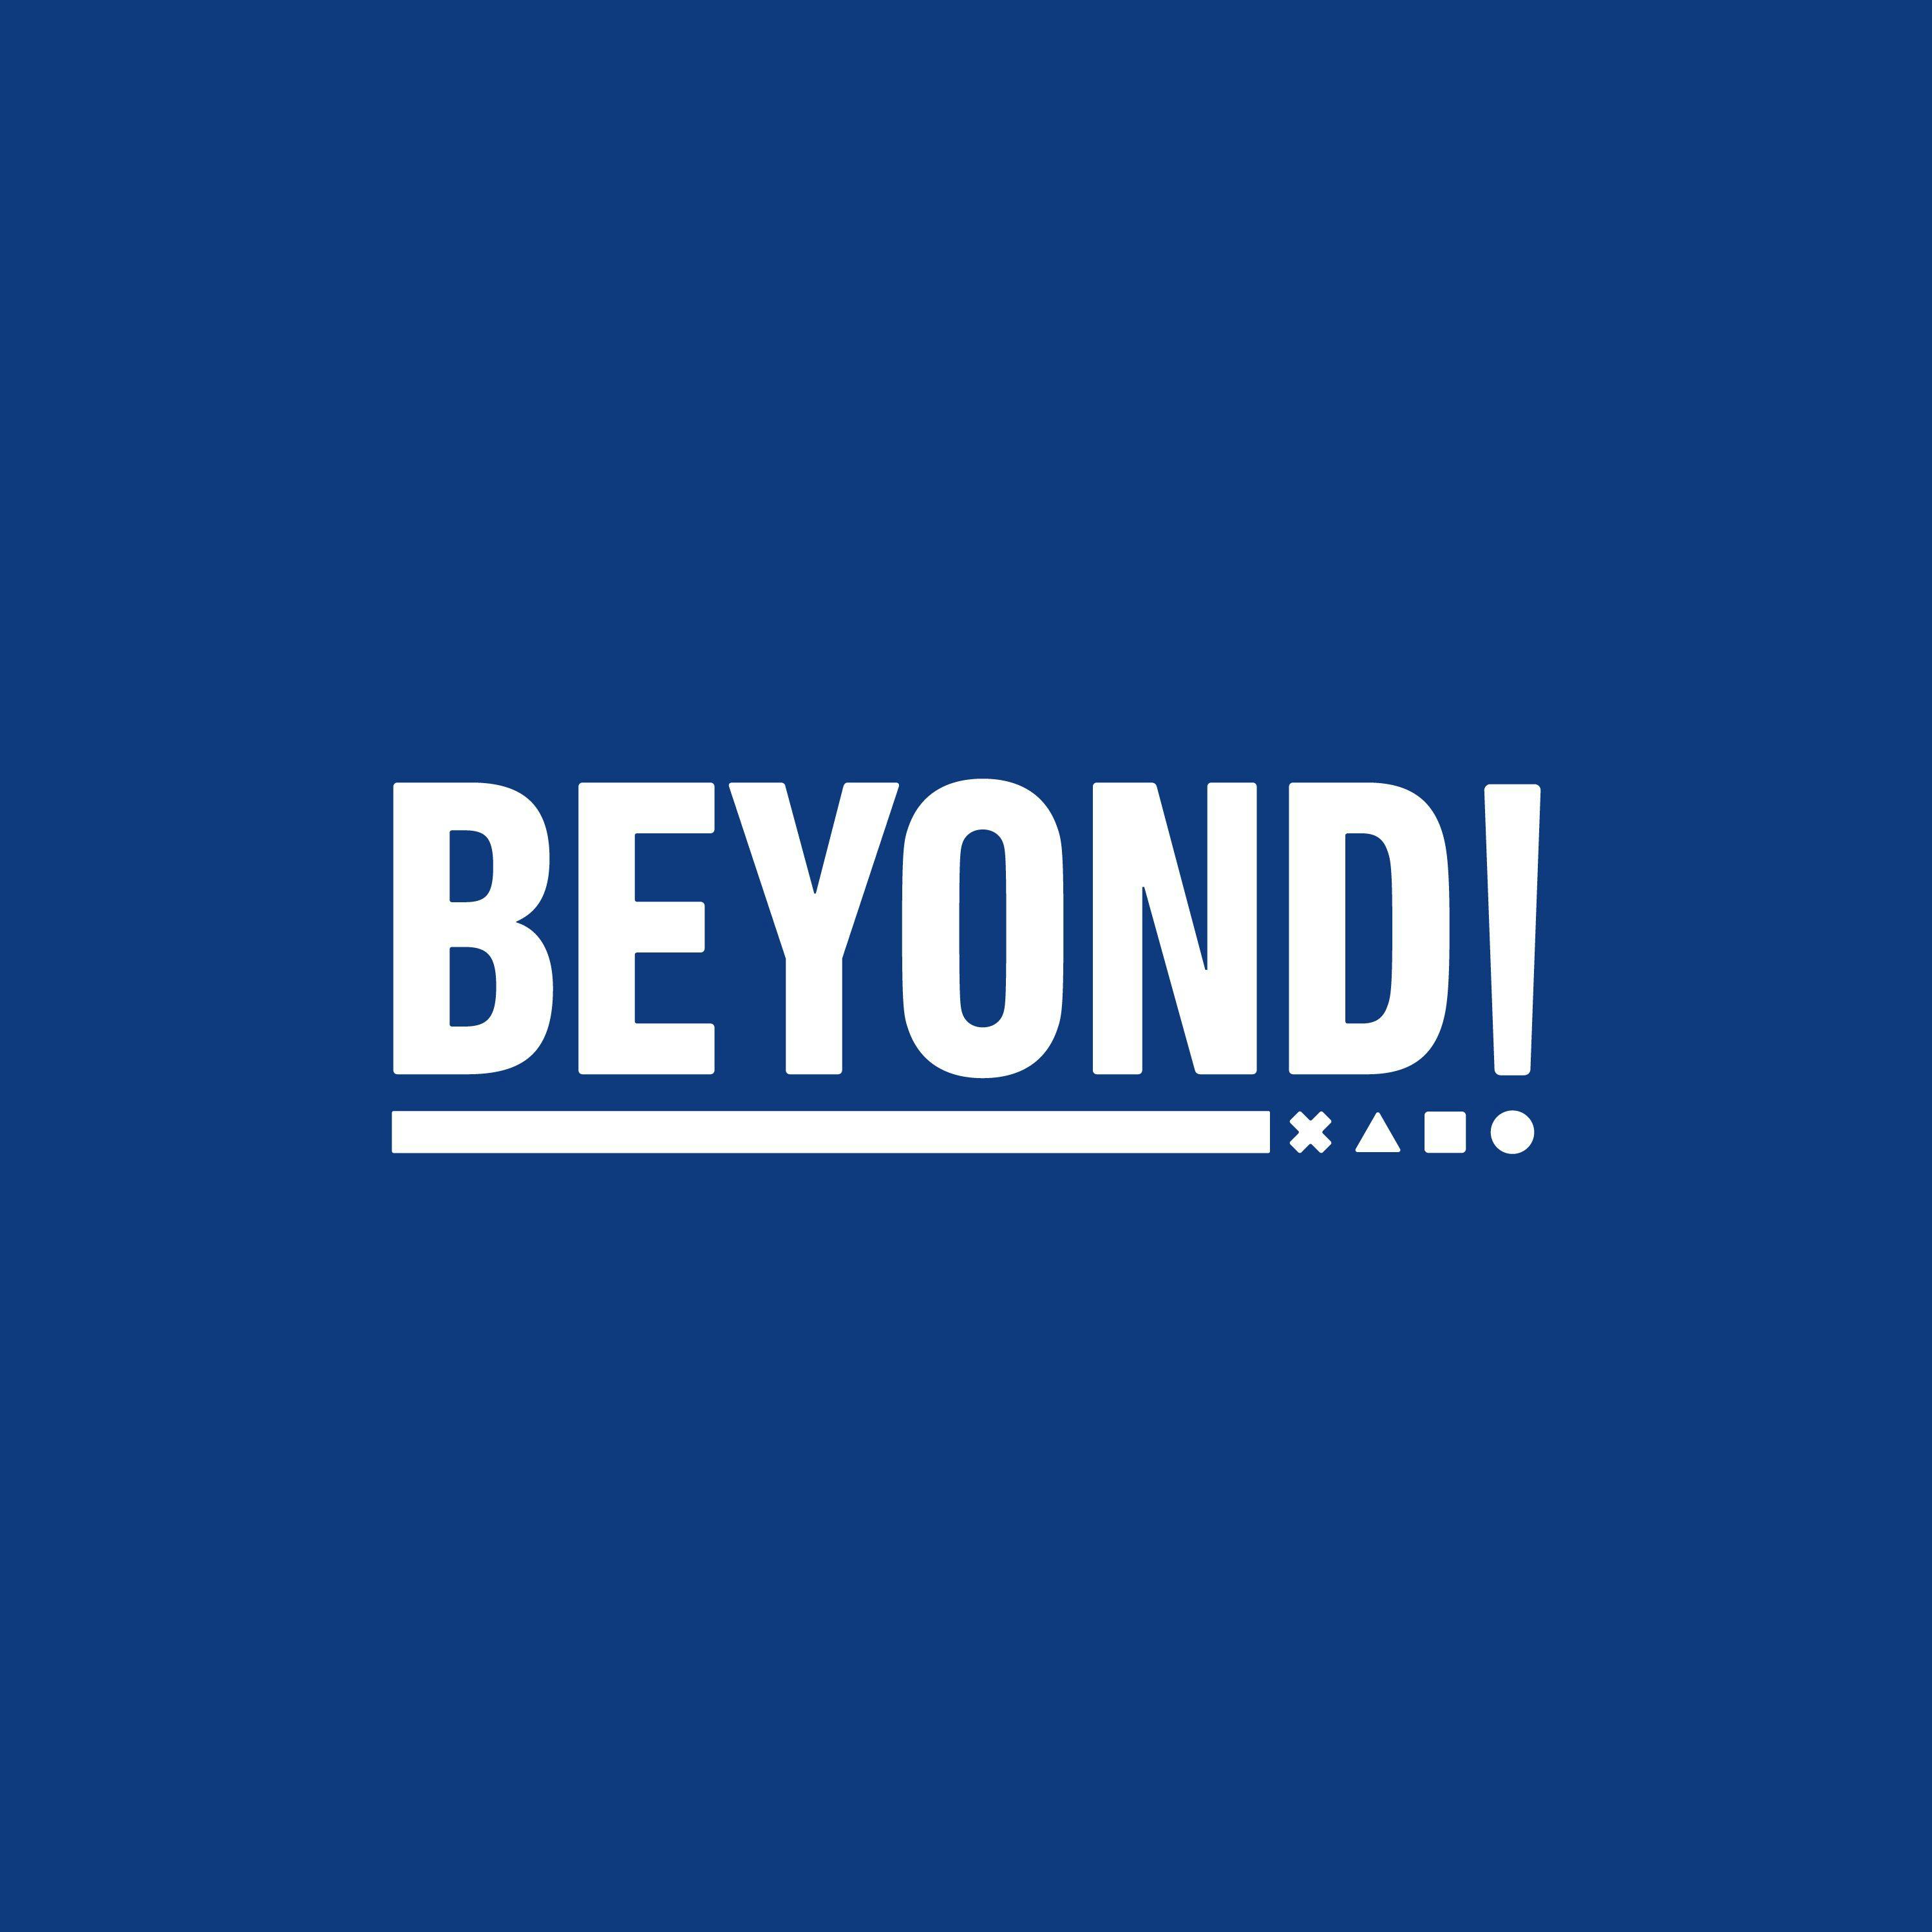 PS5's Launch Year: Looking Back at PlayStation's 2020 - Beyond Episode 681